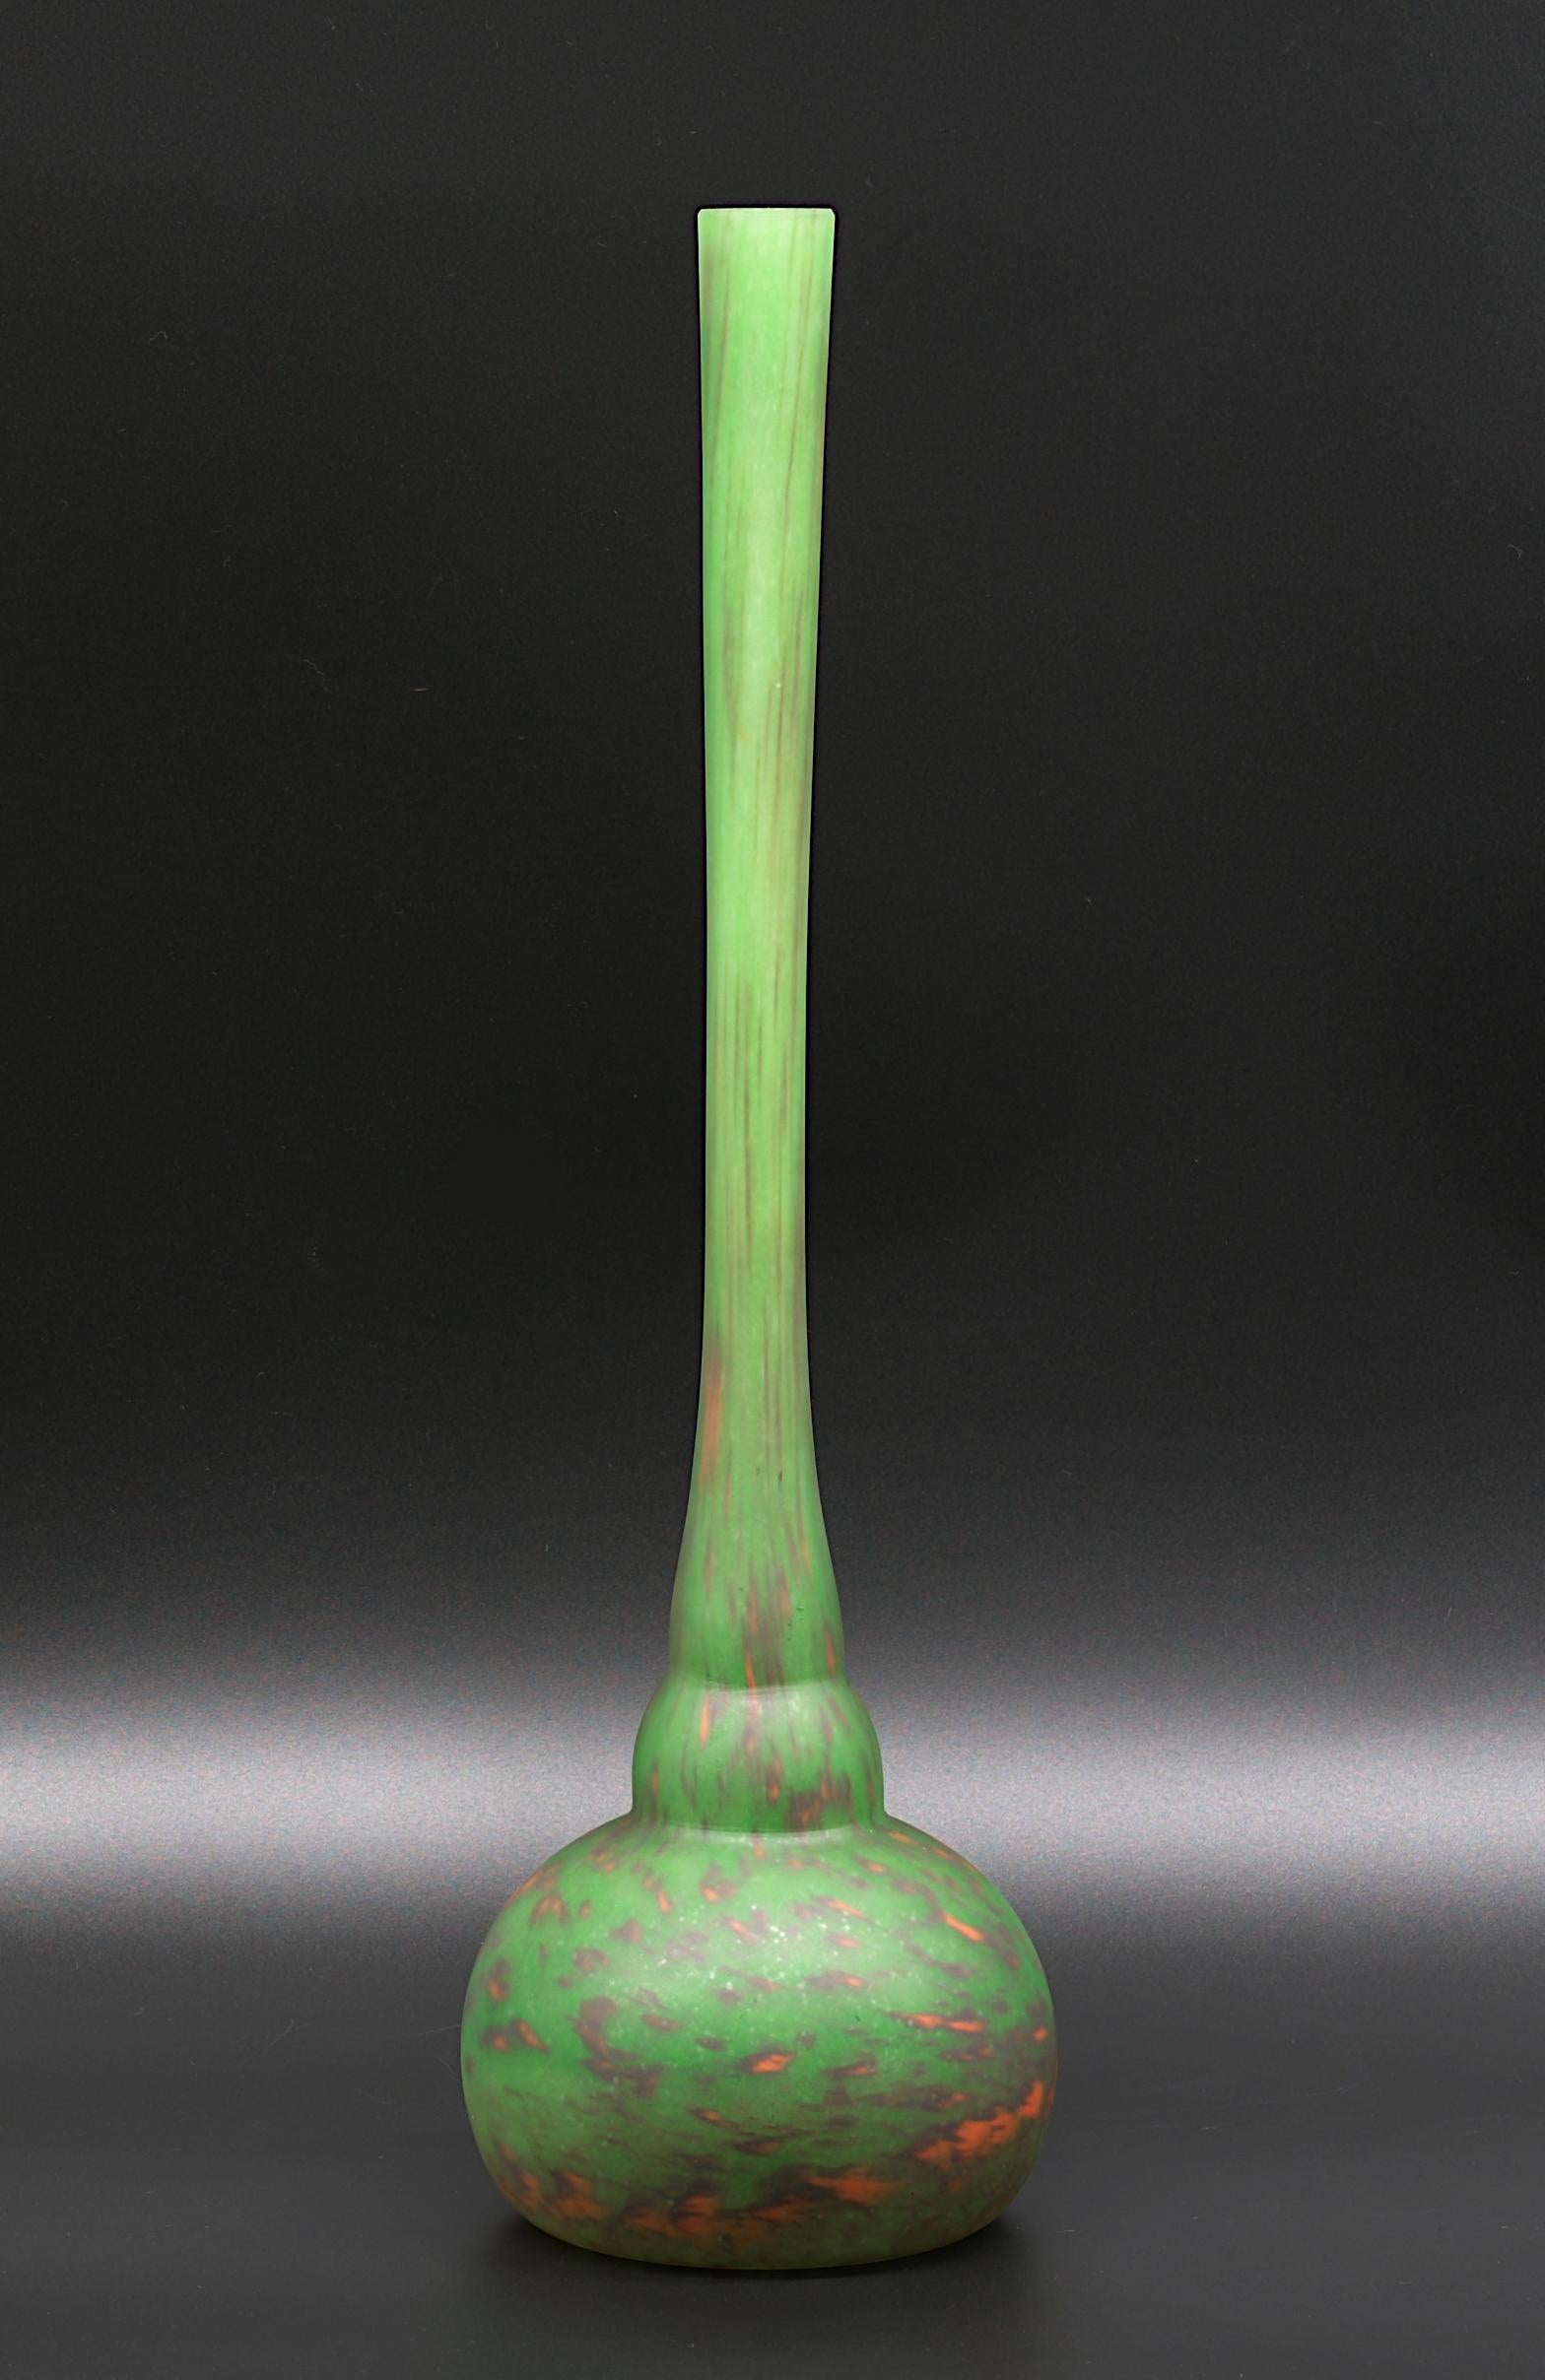 French Art Deco mottled double glass single-flower vase called berluze by DAUM (Croismare, Nancy), France, late 1920s. Green, dark blue and orange enamels are applied between the two layers. Height : 16